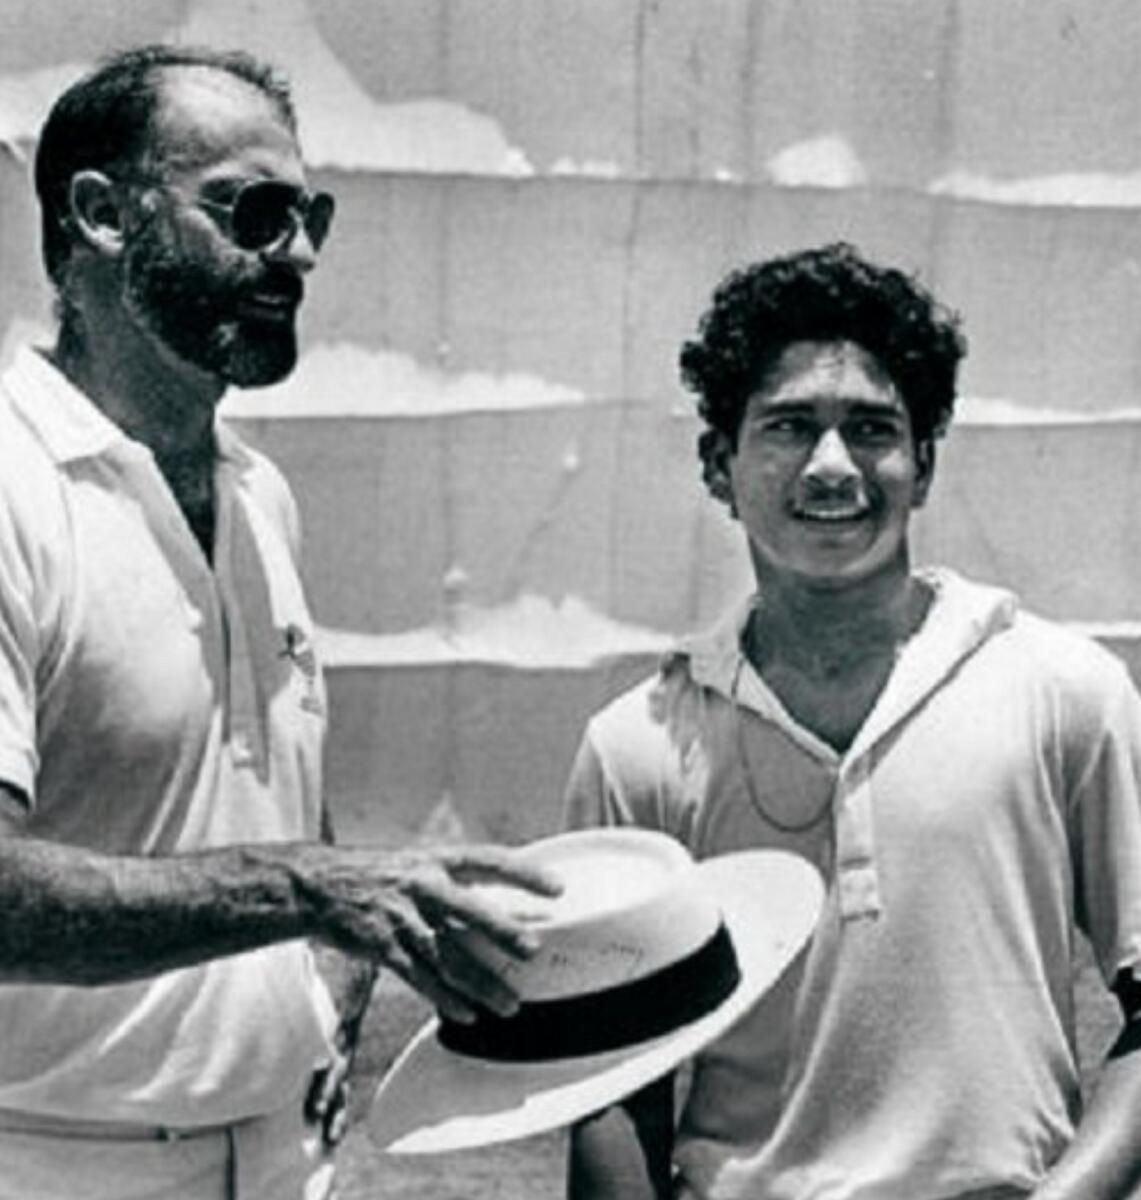 Sachin Tendulkar learning the art of fast bowling from Dennis Lillee at MRF Pace Academy. — Picture courtesy indianhistorypics Twitter